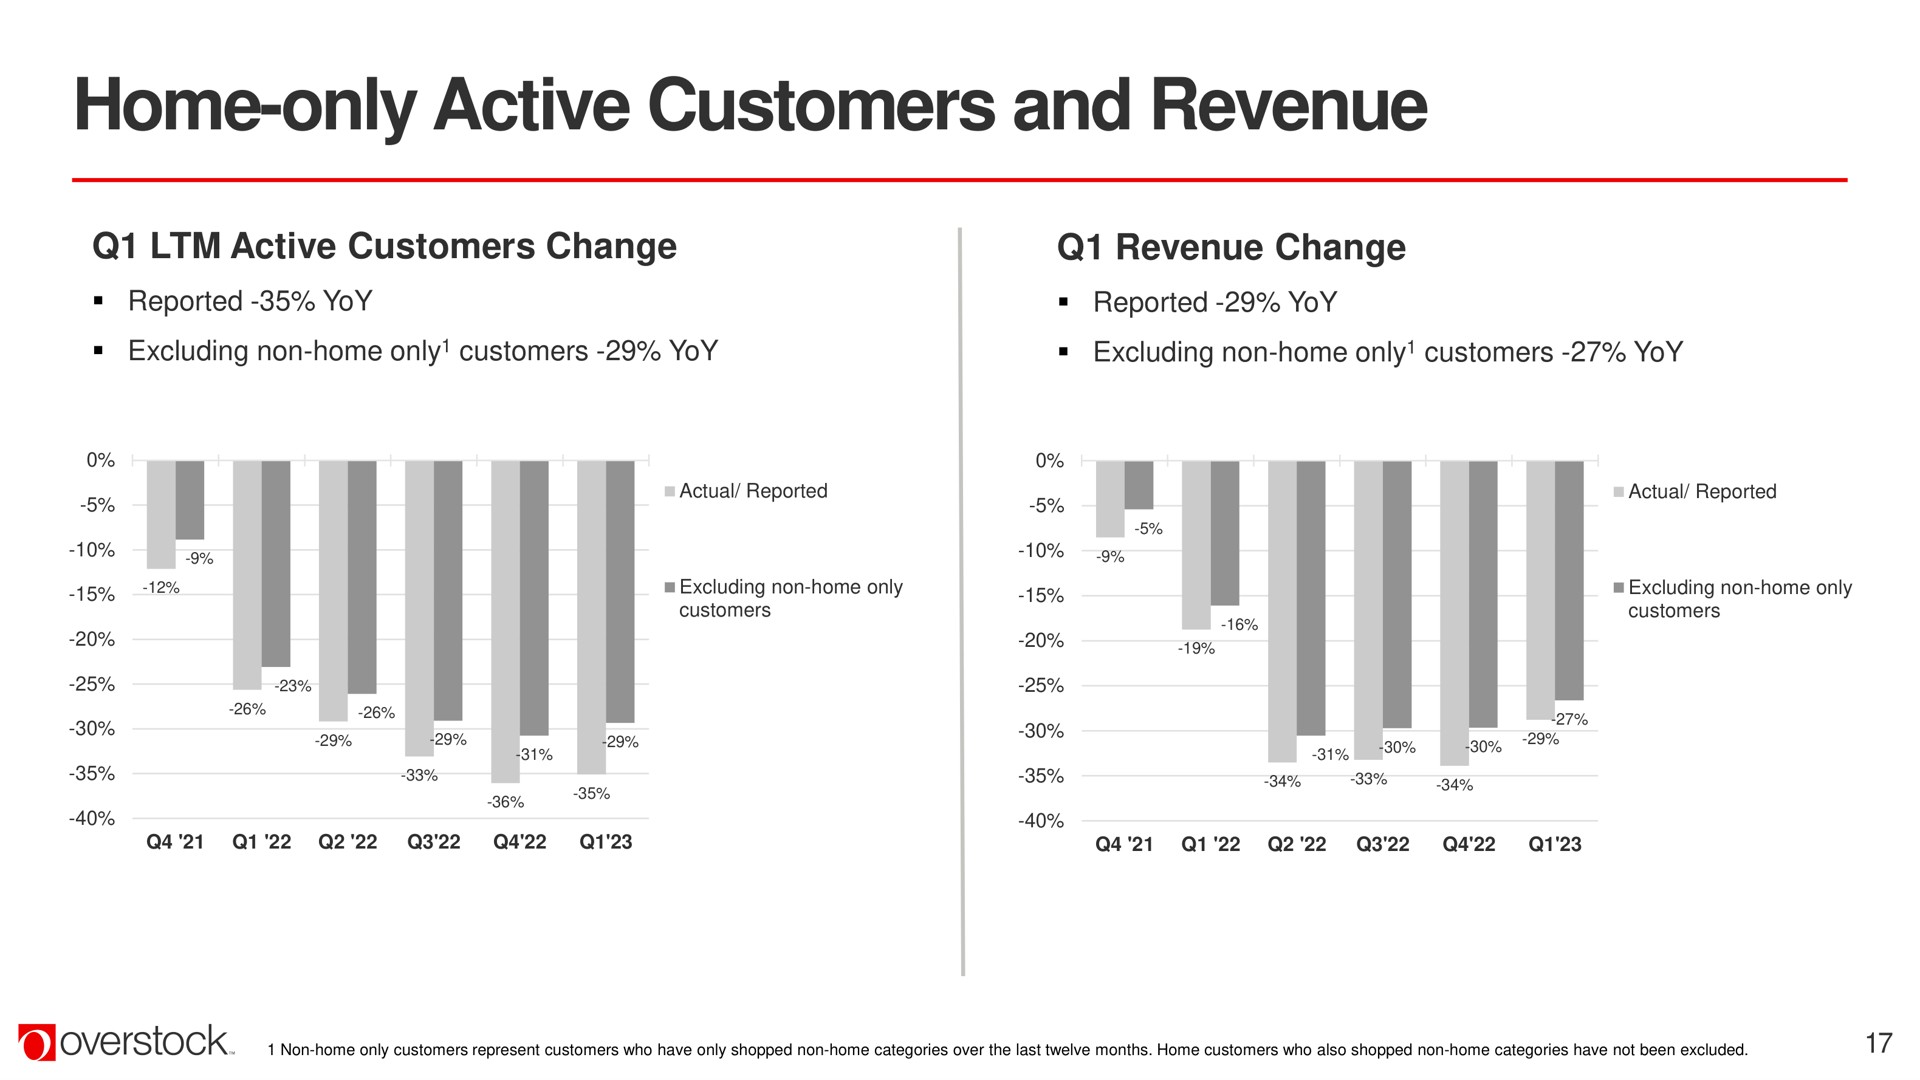 home only active customers and revenue | Overstock